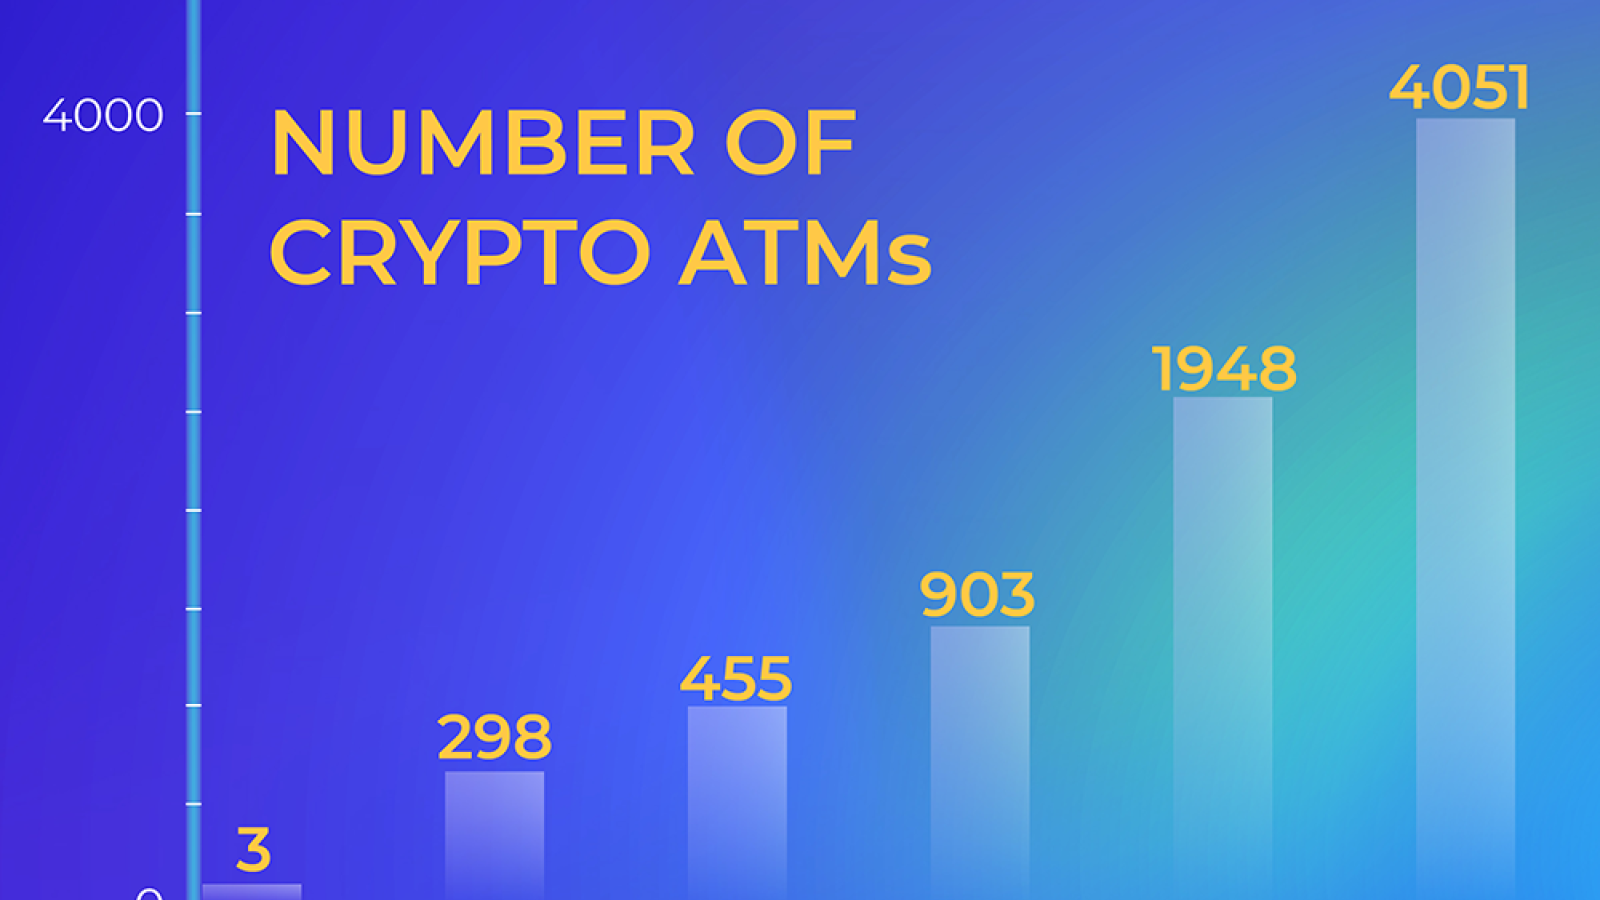 Number of ATMs